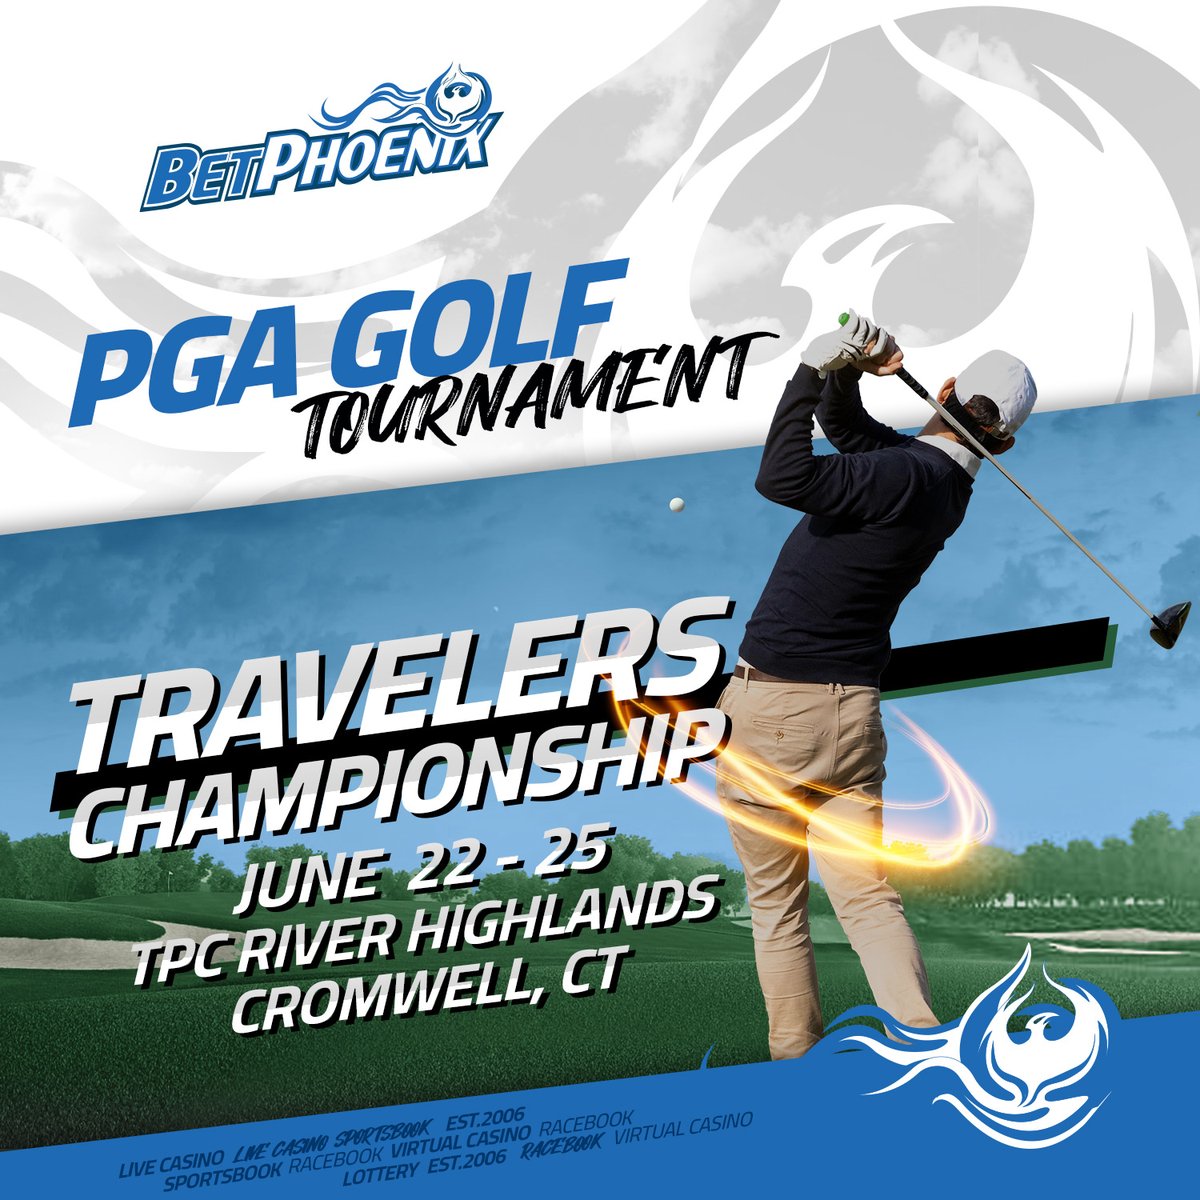 The #PGATour Travelers Championship🔥
💵Join #BetPhoenix & Get $100, Check📌

🏌️‍♂️#TravelersChampionship
⛳️June 21-25 @ #TPCRiverHighlands

The field is loaded for New England's #PGA stop.
Get in on the daily action!🏆

#Golf #GolfTalk #GolfPicks #SportsBetting #BettingTwitter